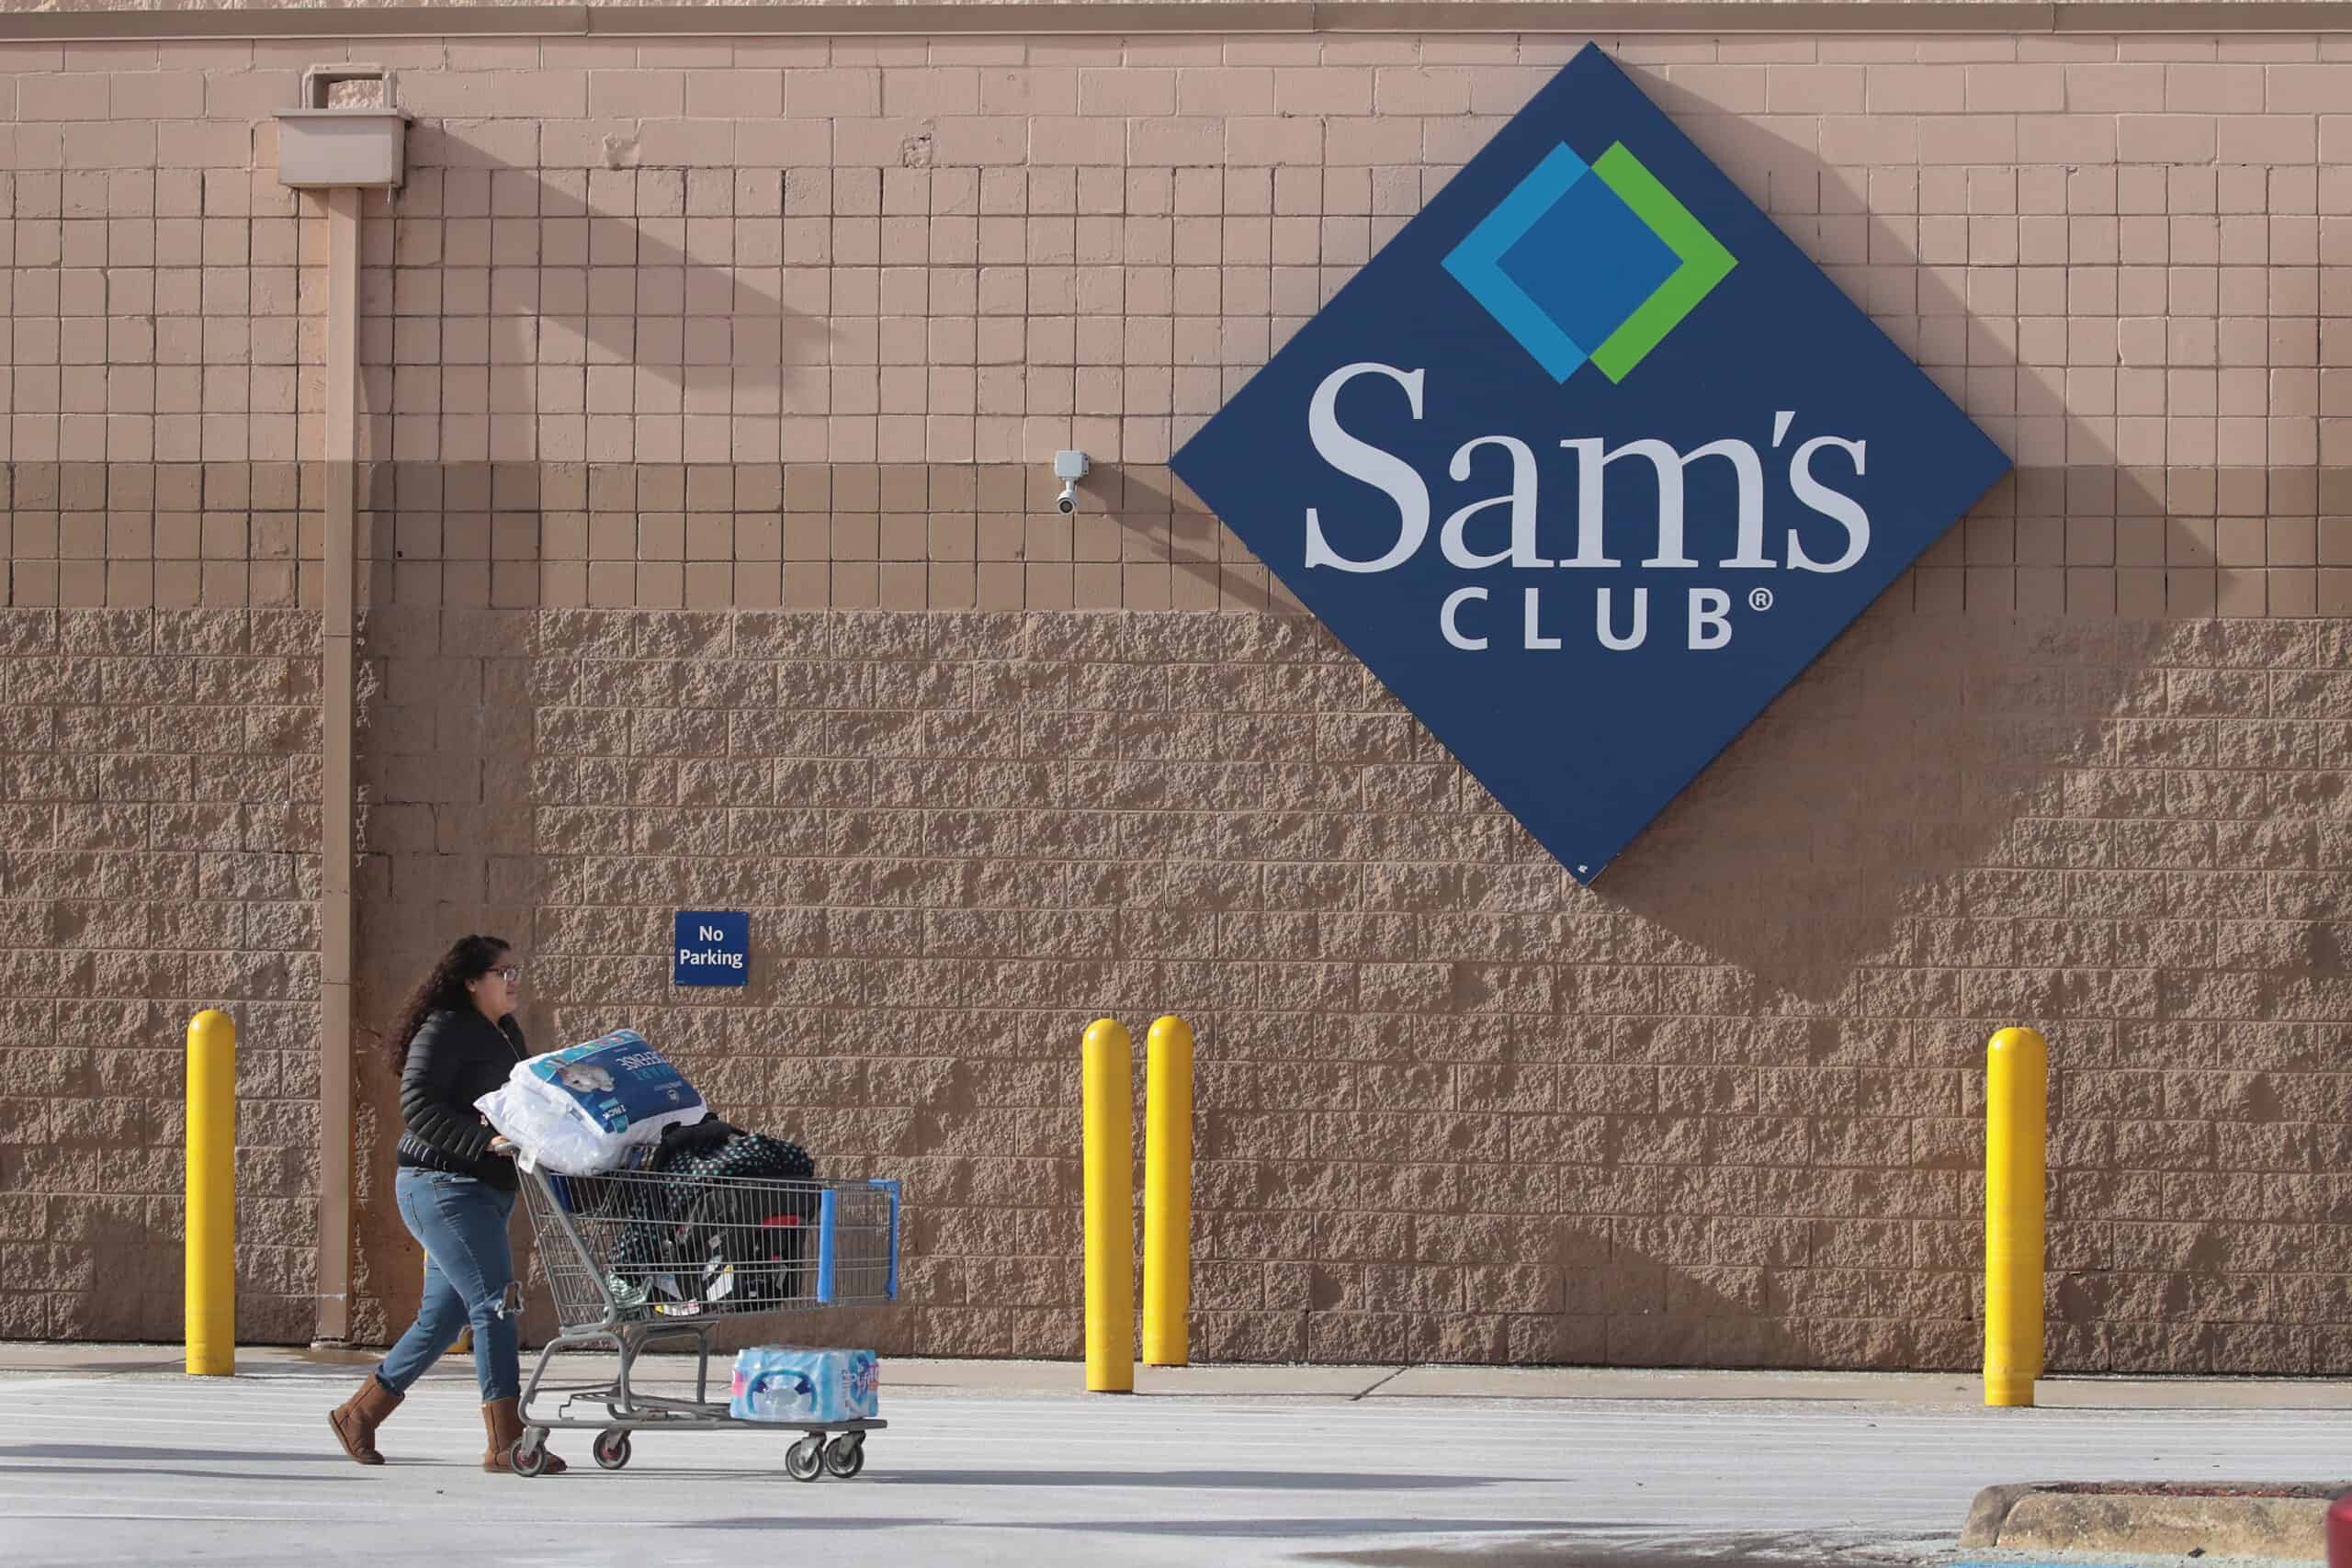 A shopper stocks up on merchandise at a Sam's Club store.